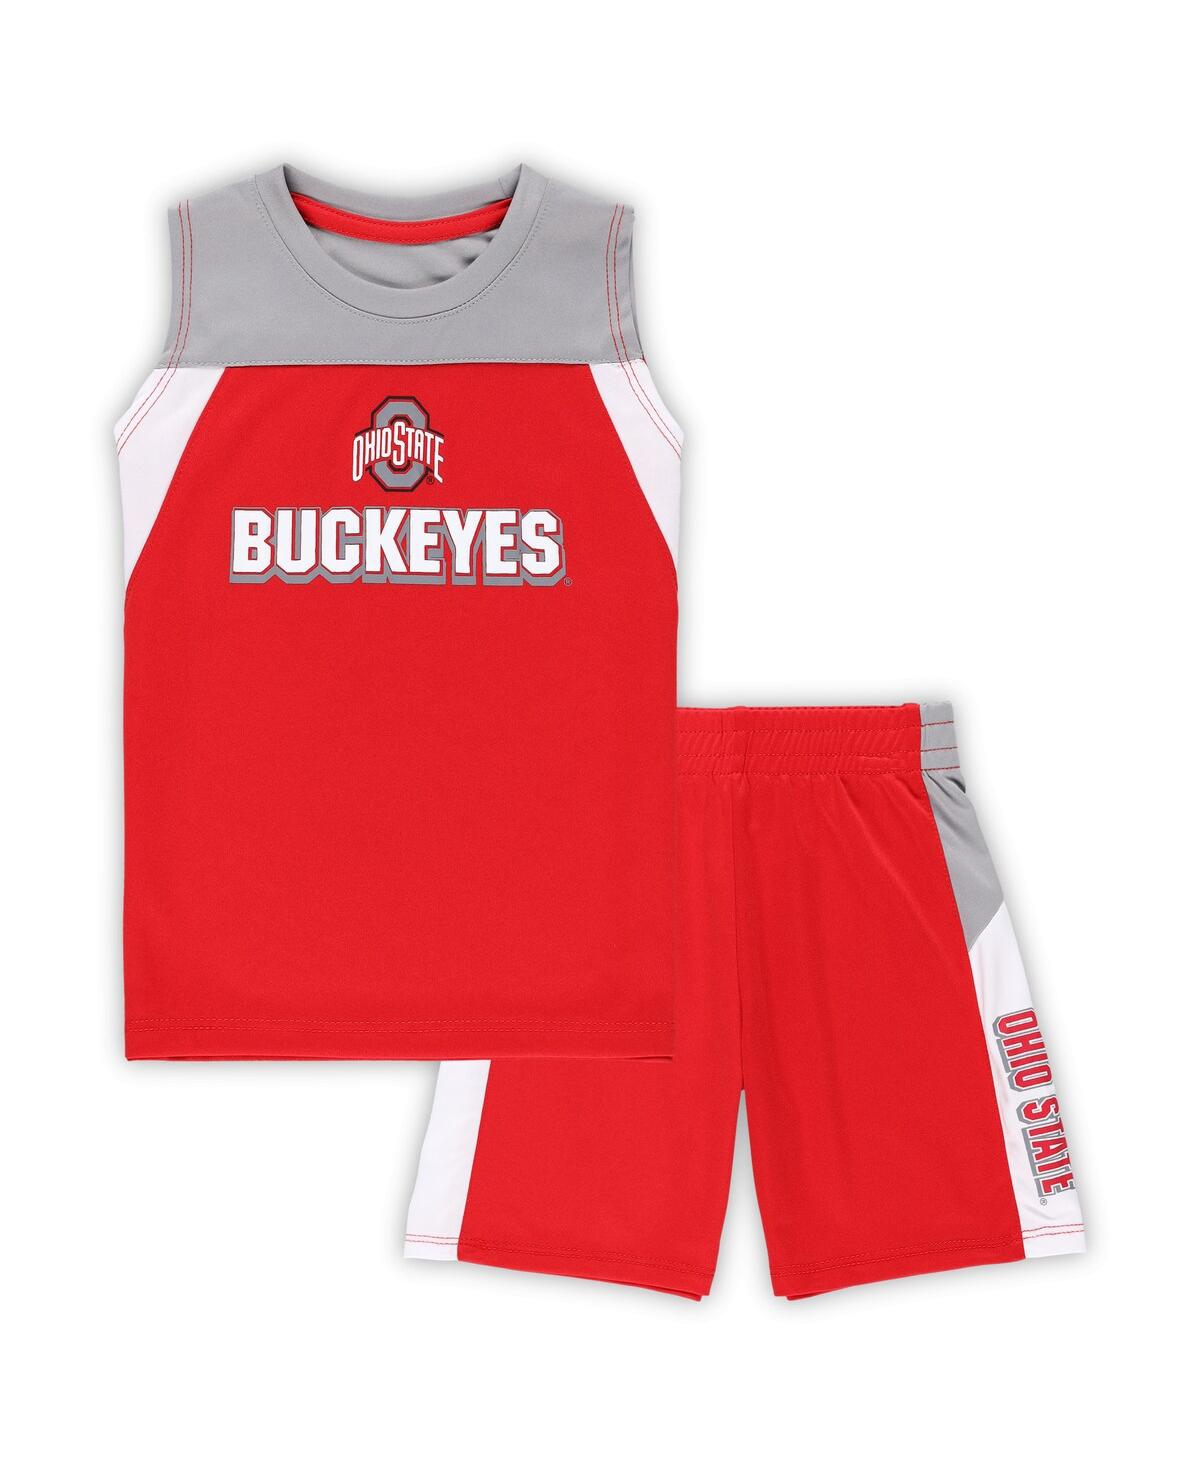 Colosseum Babies' Toddler Boys And Girls  Scarlet Ohio State Buckeyes Ozone Tank Top And Shorts Set